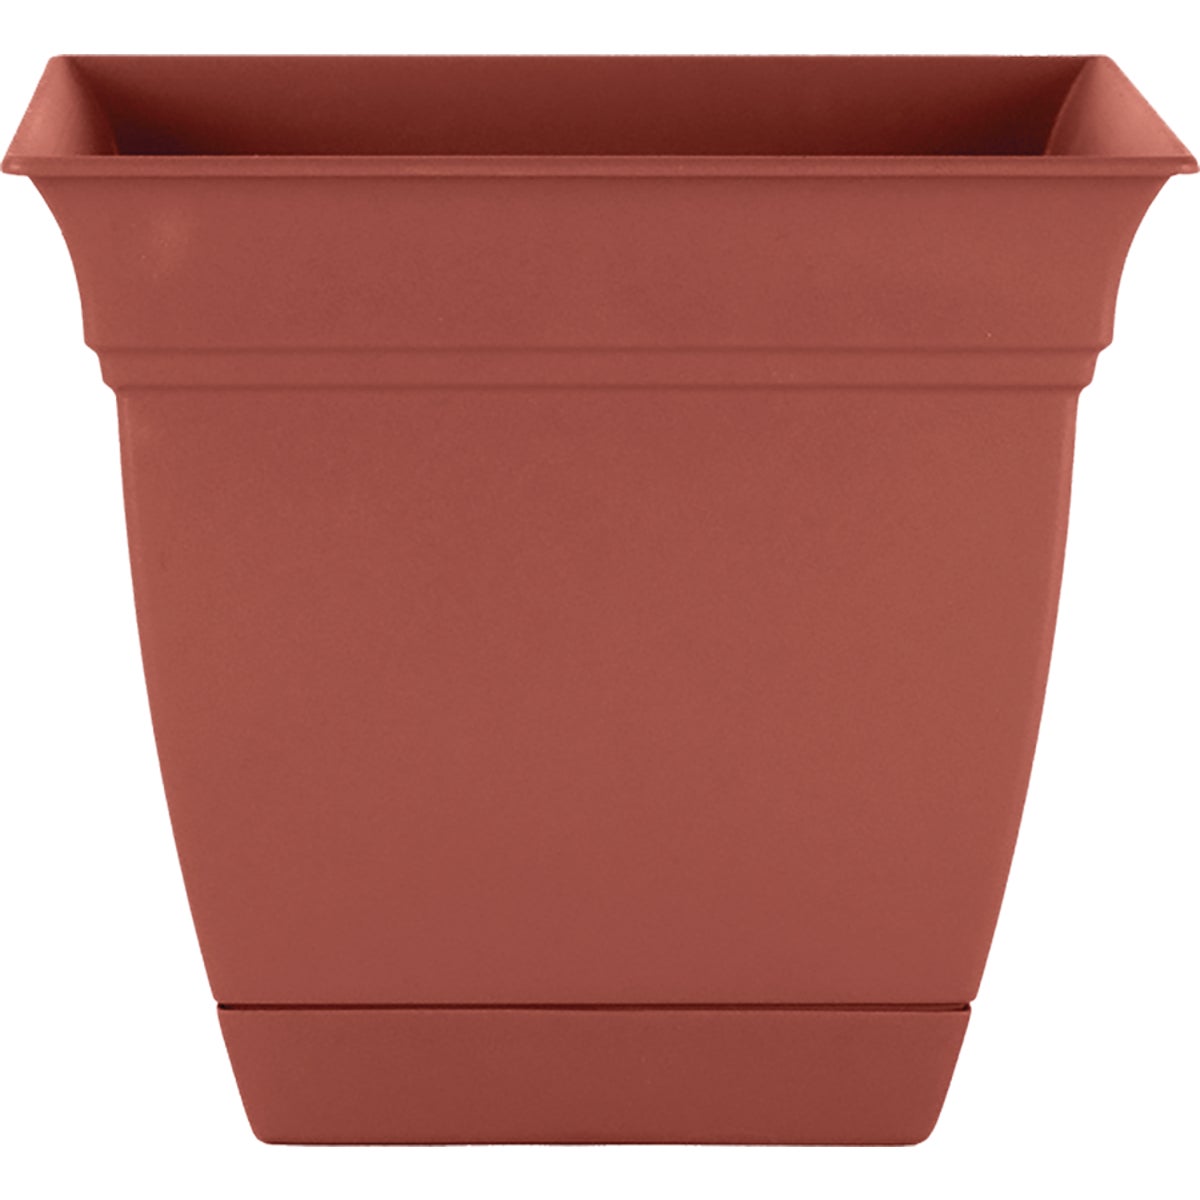 HC Companies Eclipse 12 In. x 12 In. x 10.50 In. Resin Clay Planter